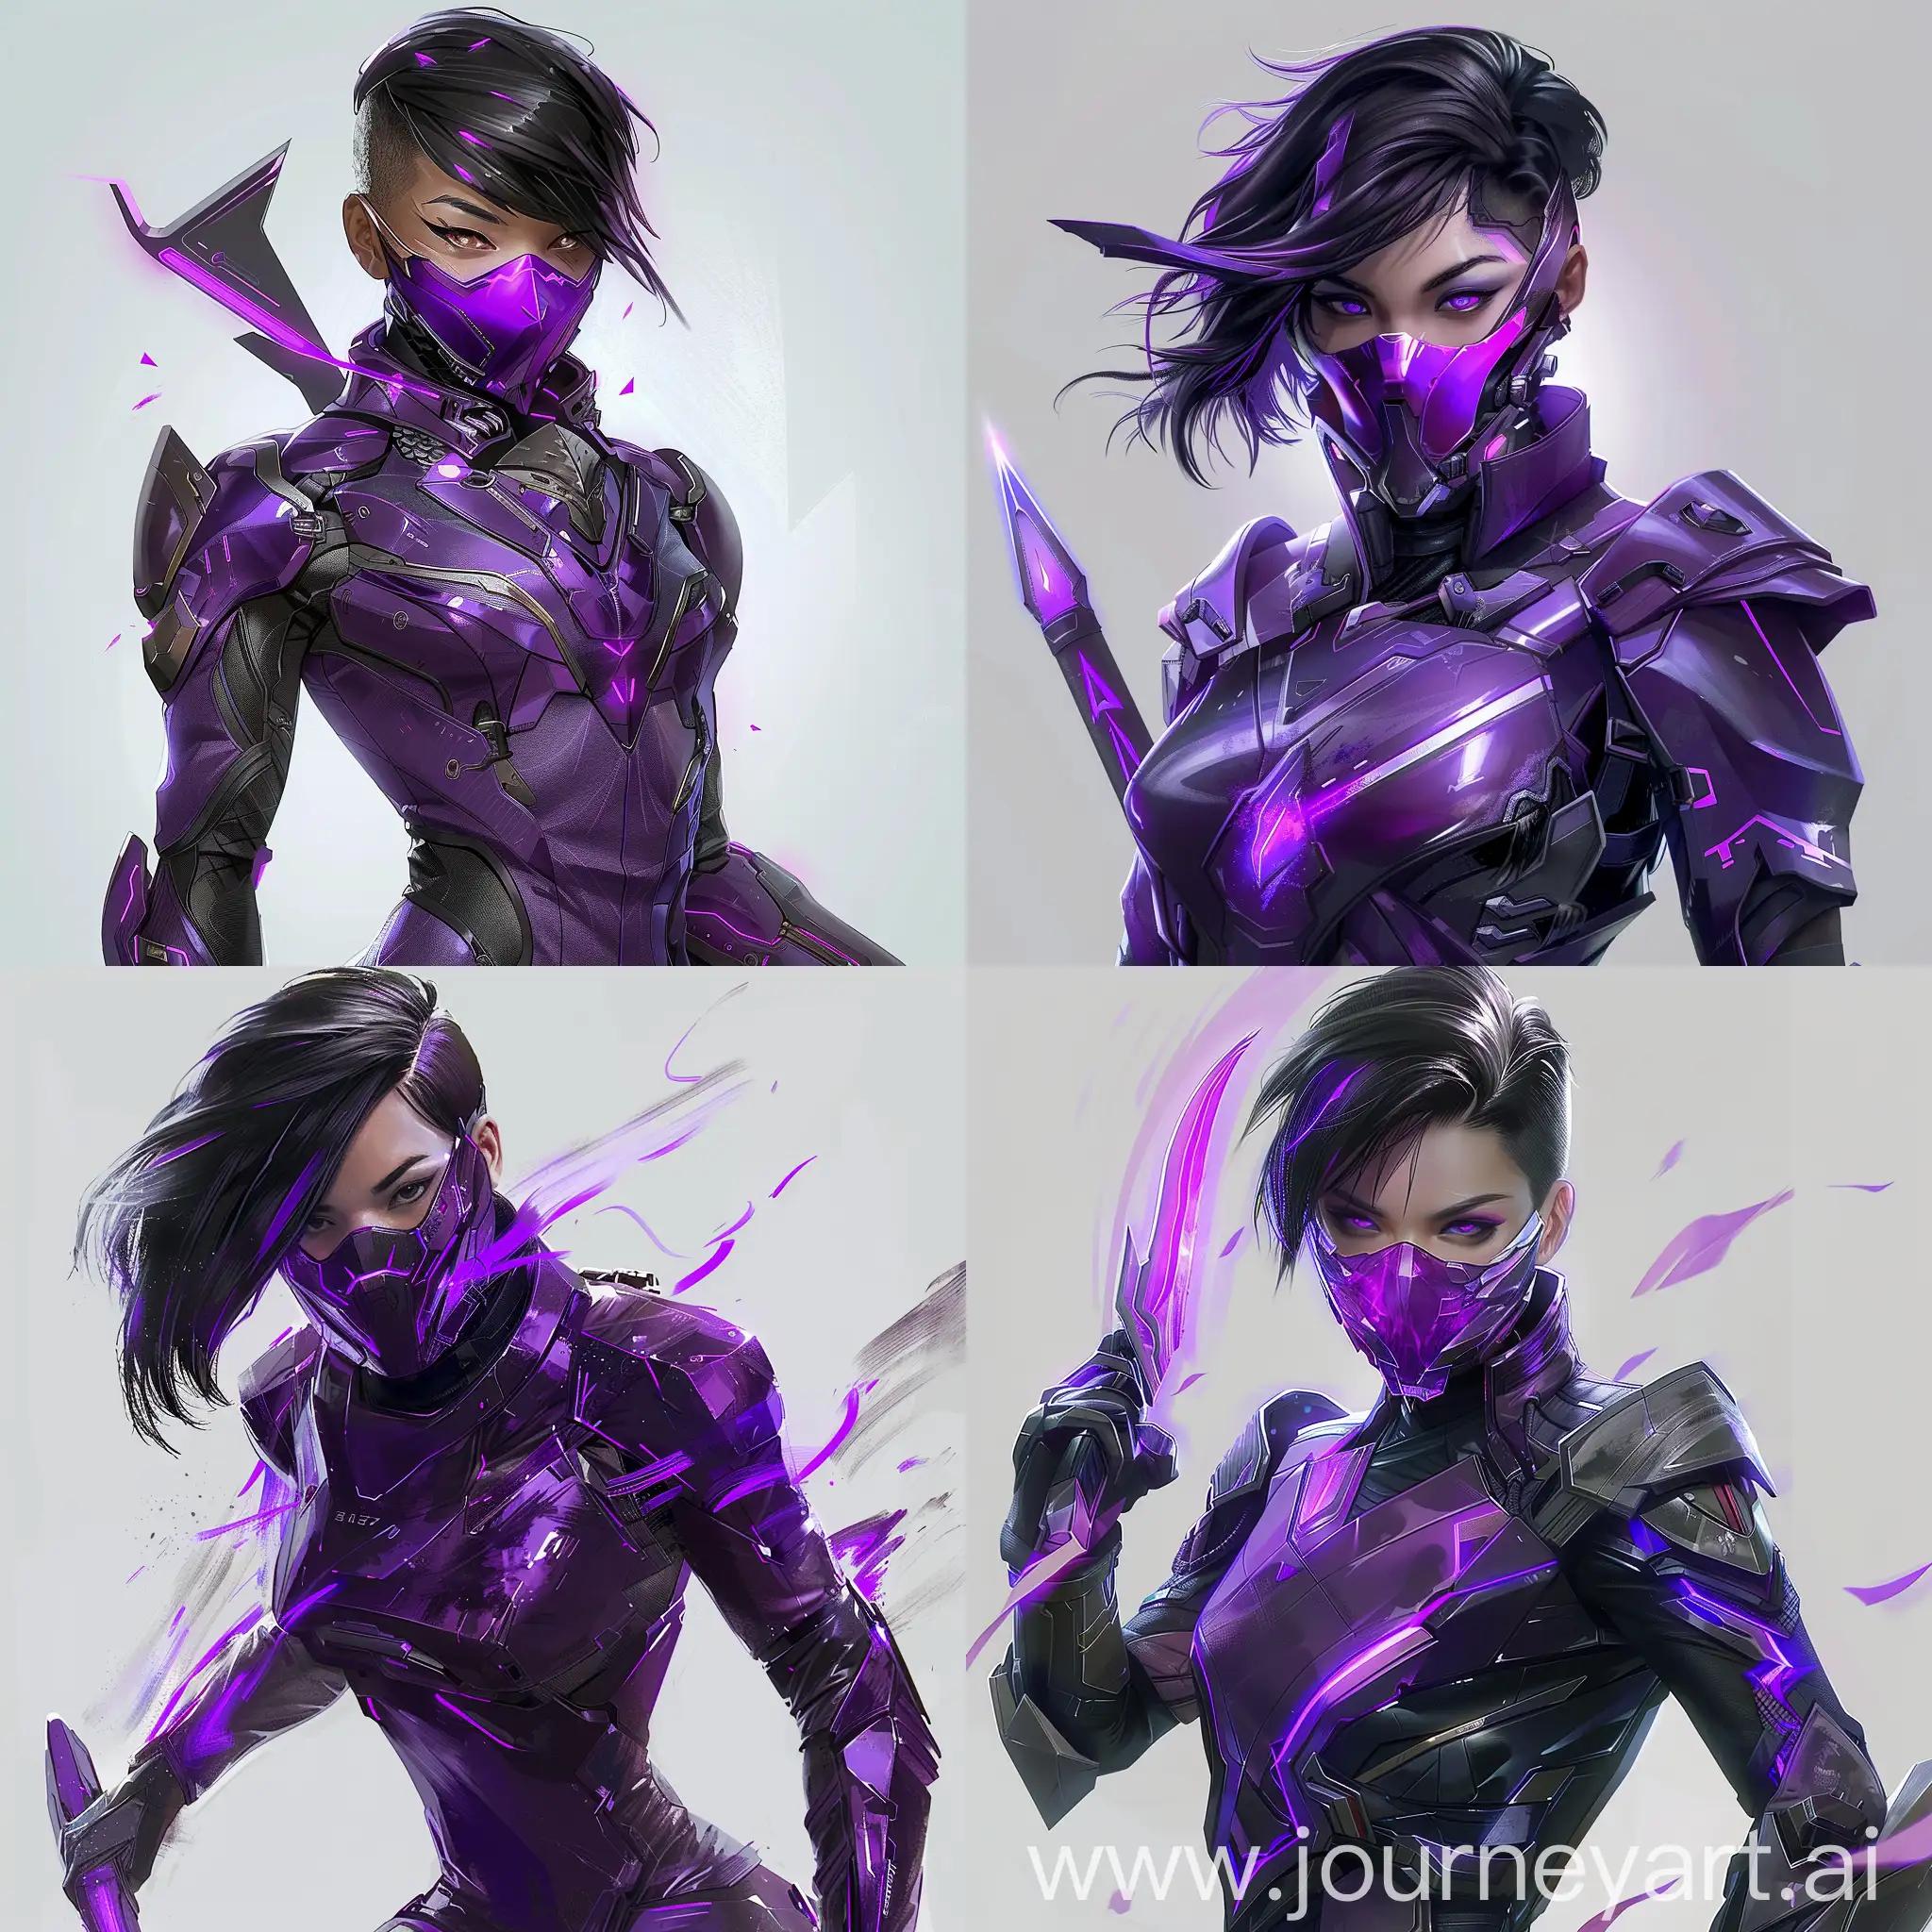 Futuristic-Female-Warrior-with-Energy-Blade-in-Dynamic-Pose